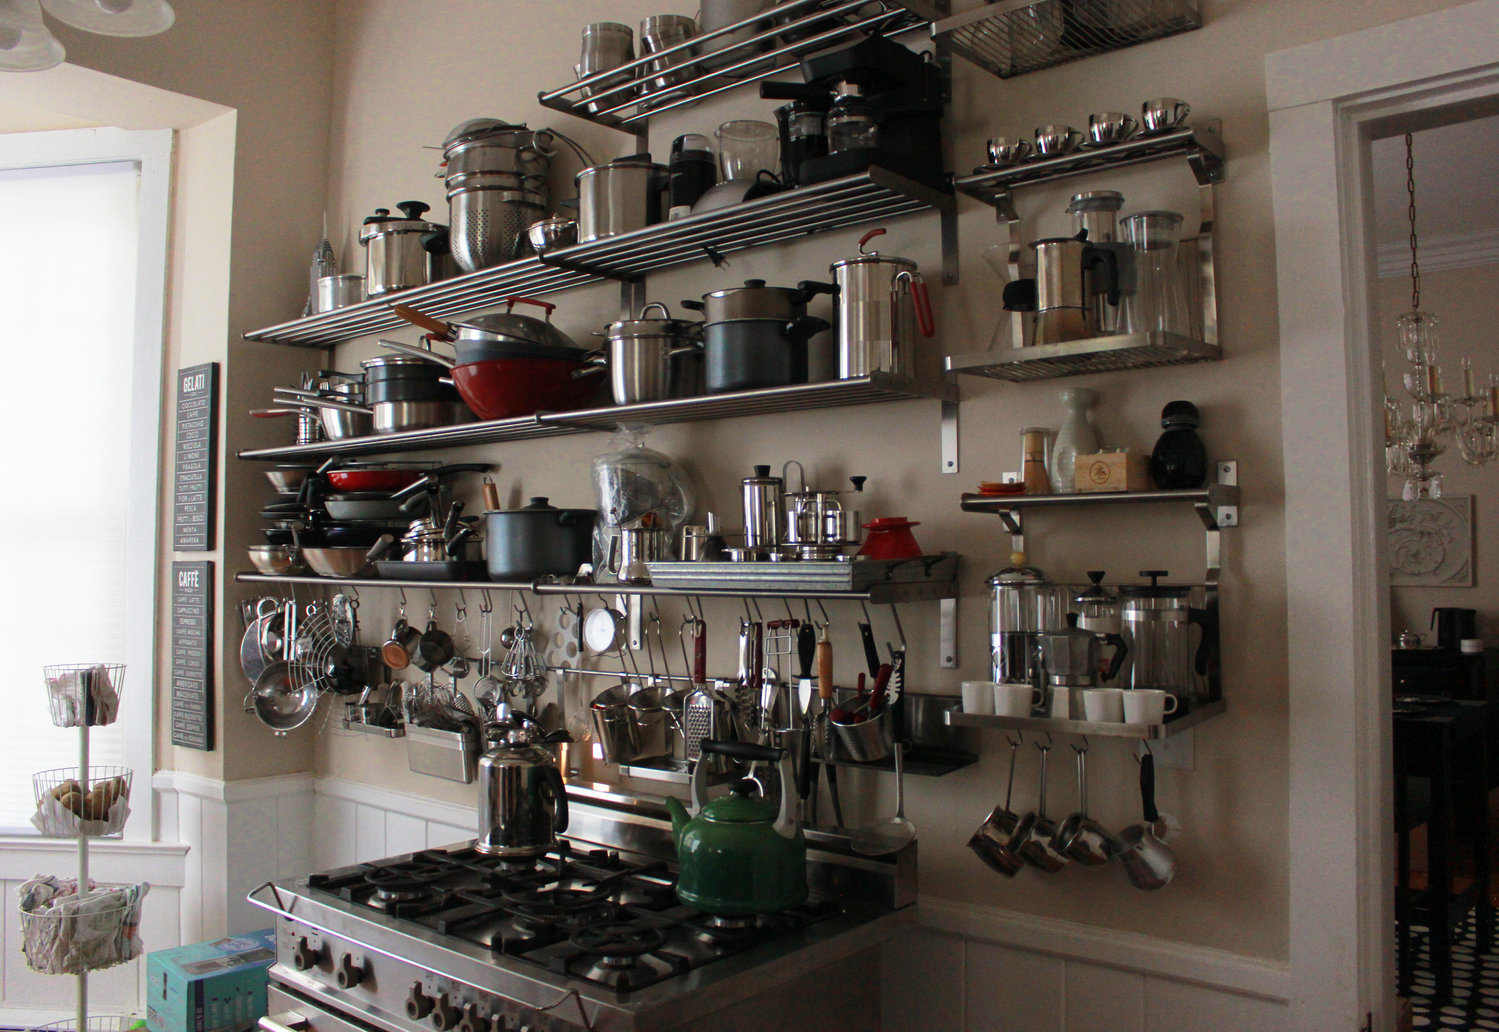 Shelves full of pots, pans and other cooking items line the kitchen of the house formarly known as Aunt Bee’s house in Siler City. The property was put up for sale by its previous owners in 2021.